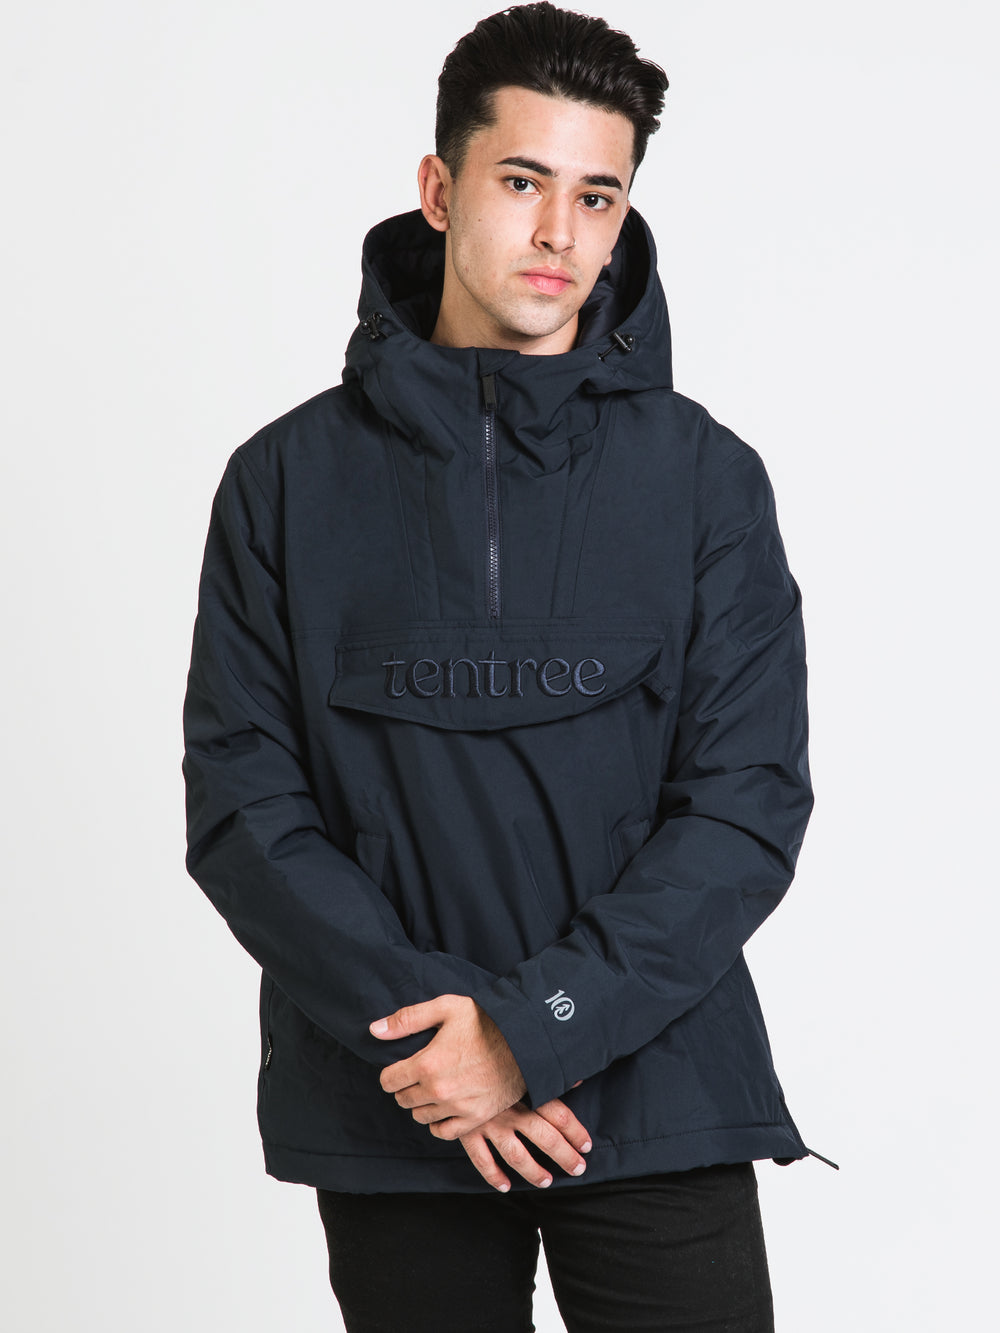 TENTREE CLOUD SHELL ANORAK JACKET - CLEARANCE